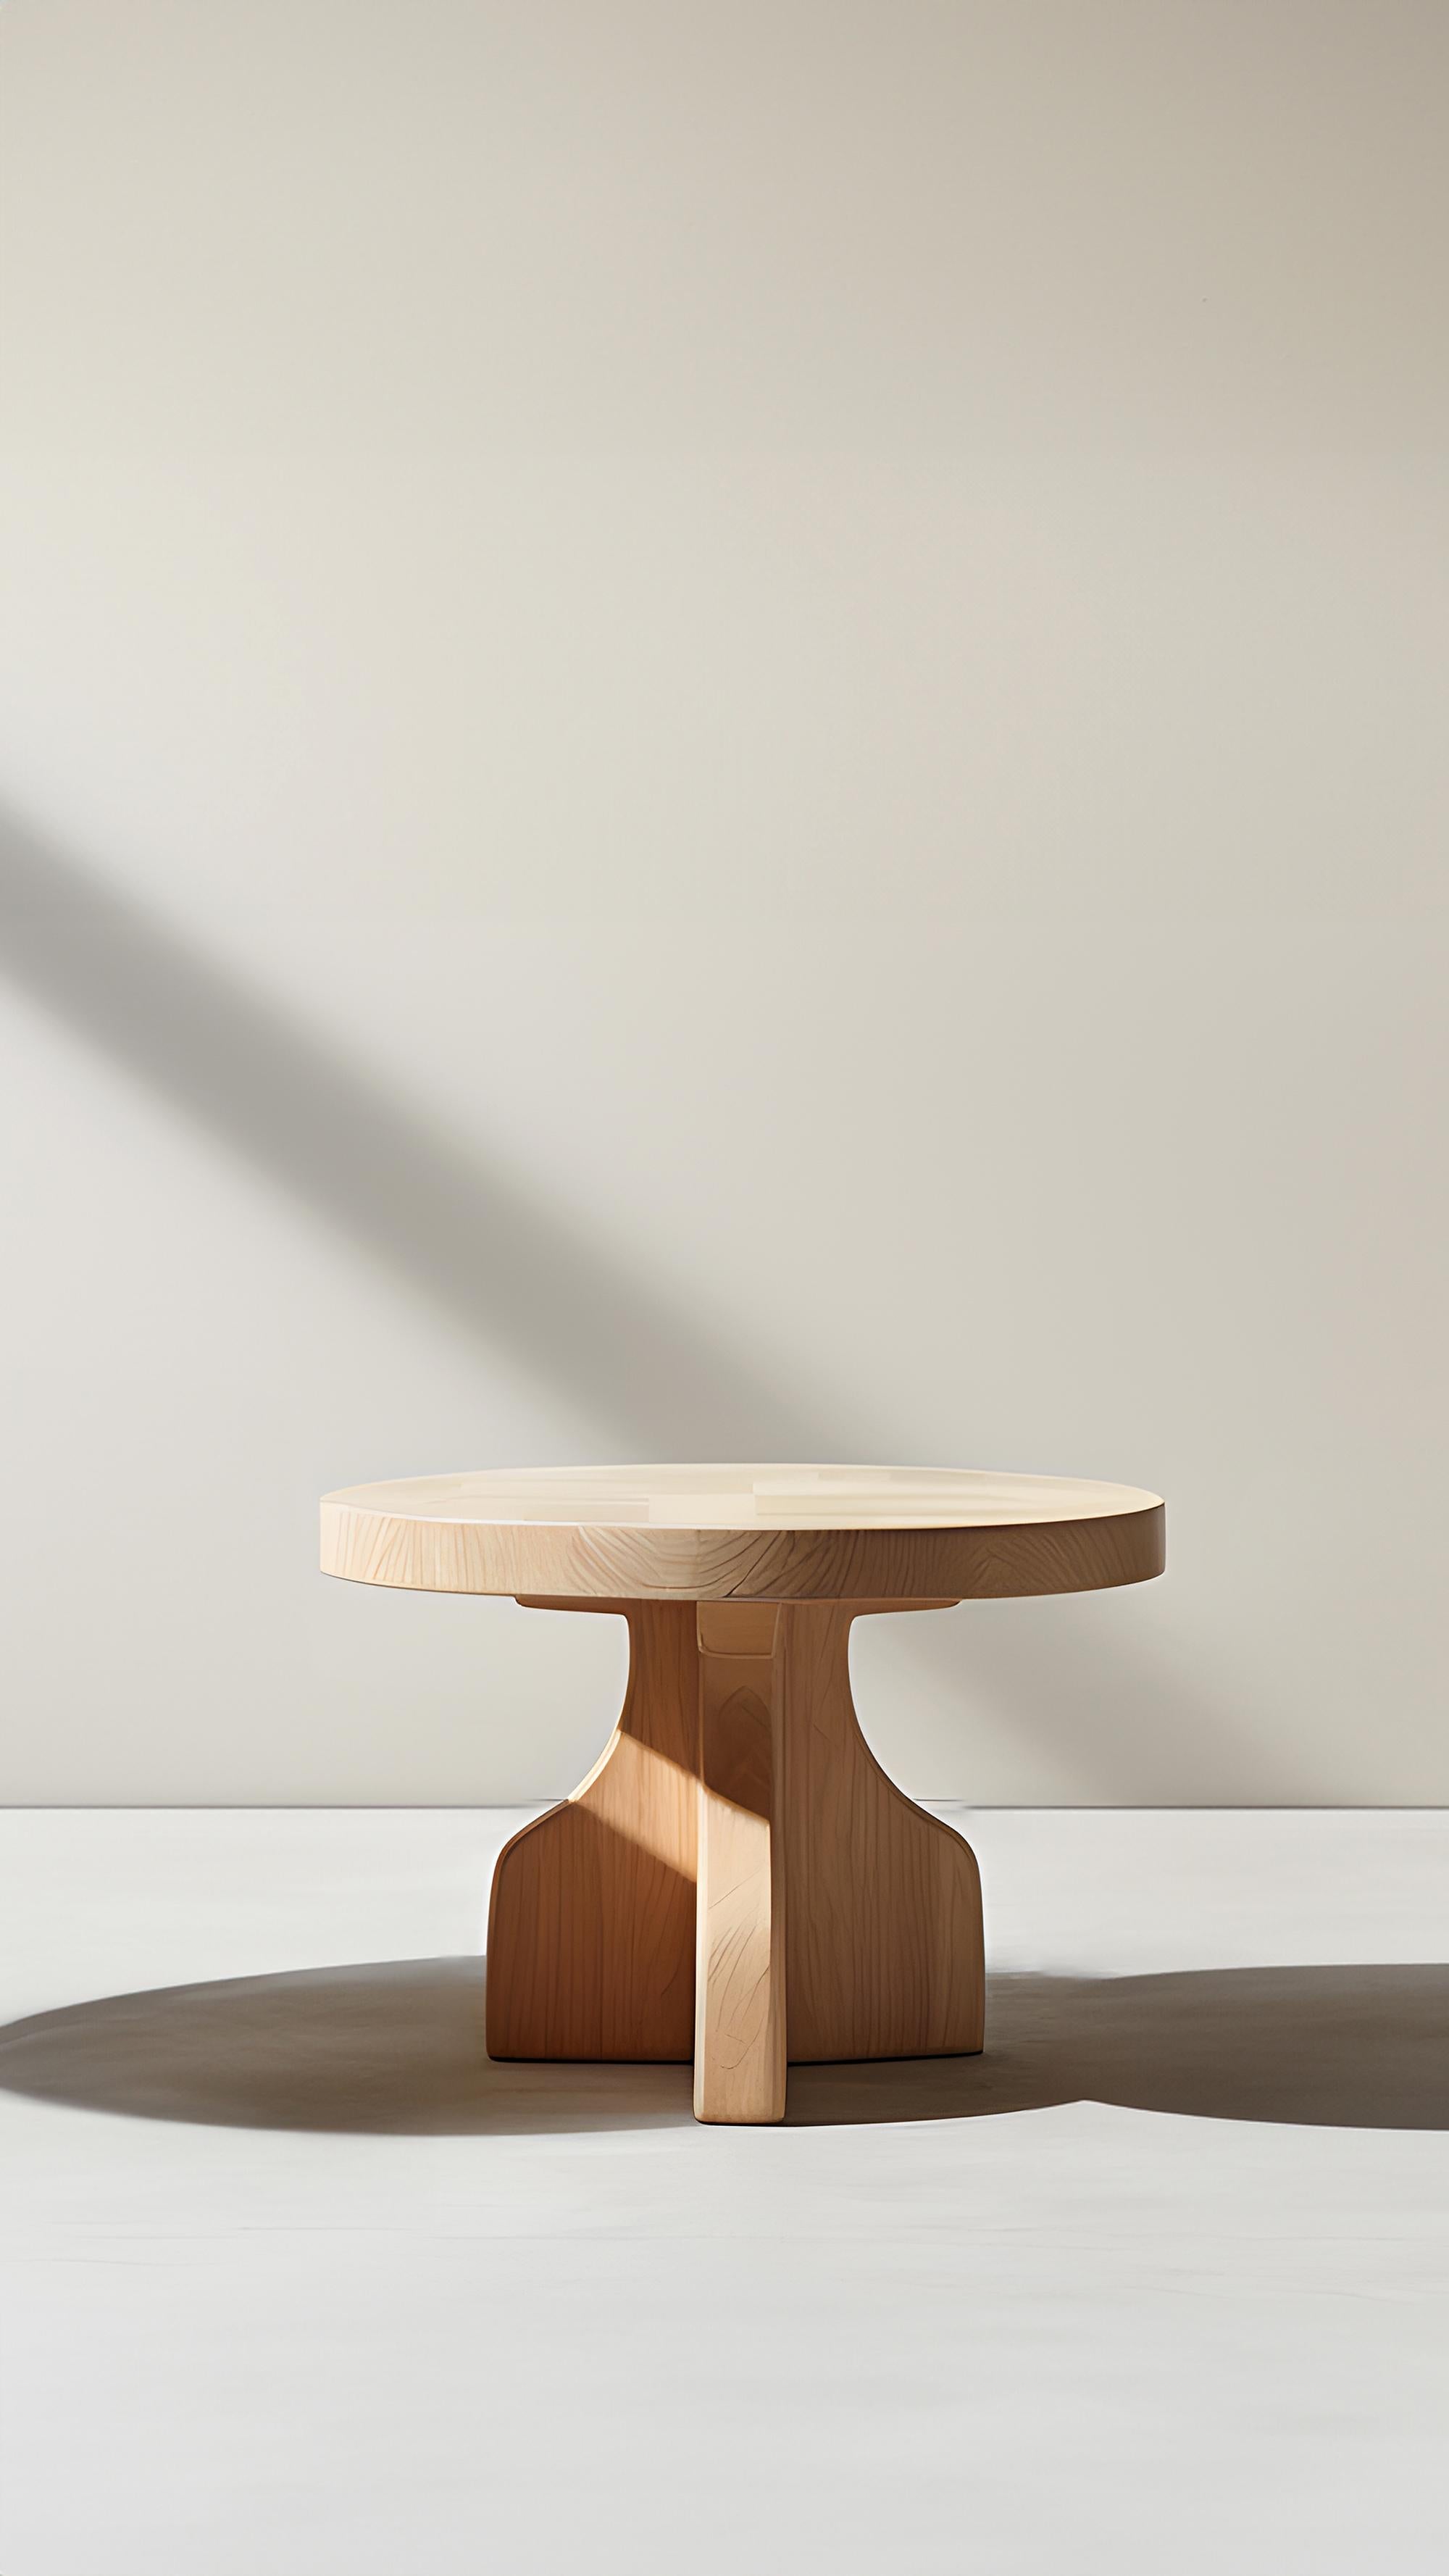 Hardwood Fundamenta Round Side Table 49 Solid Wood, Geometric Elegance by NONO For Sale